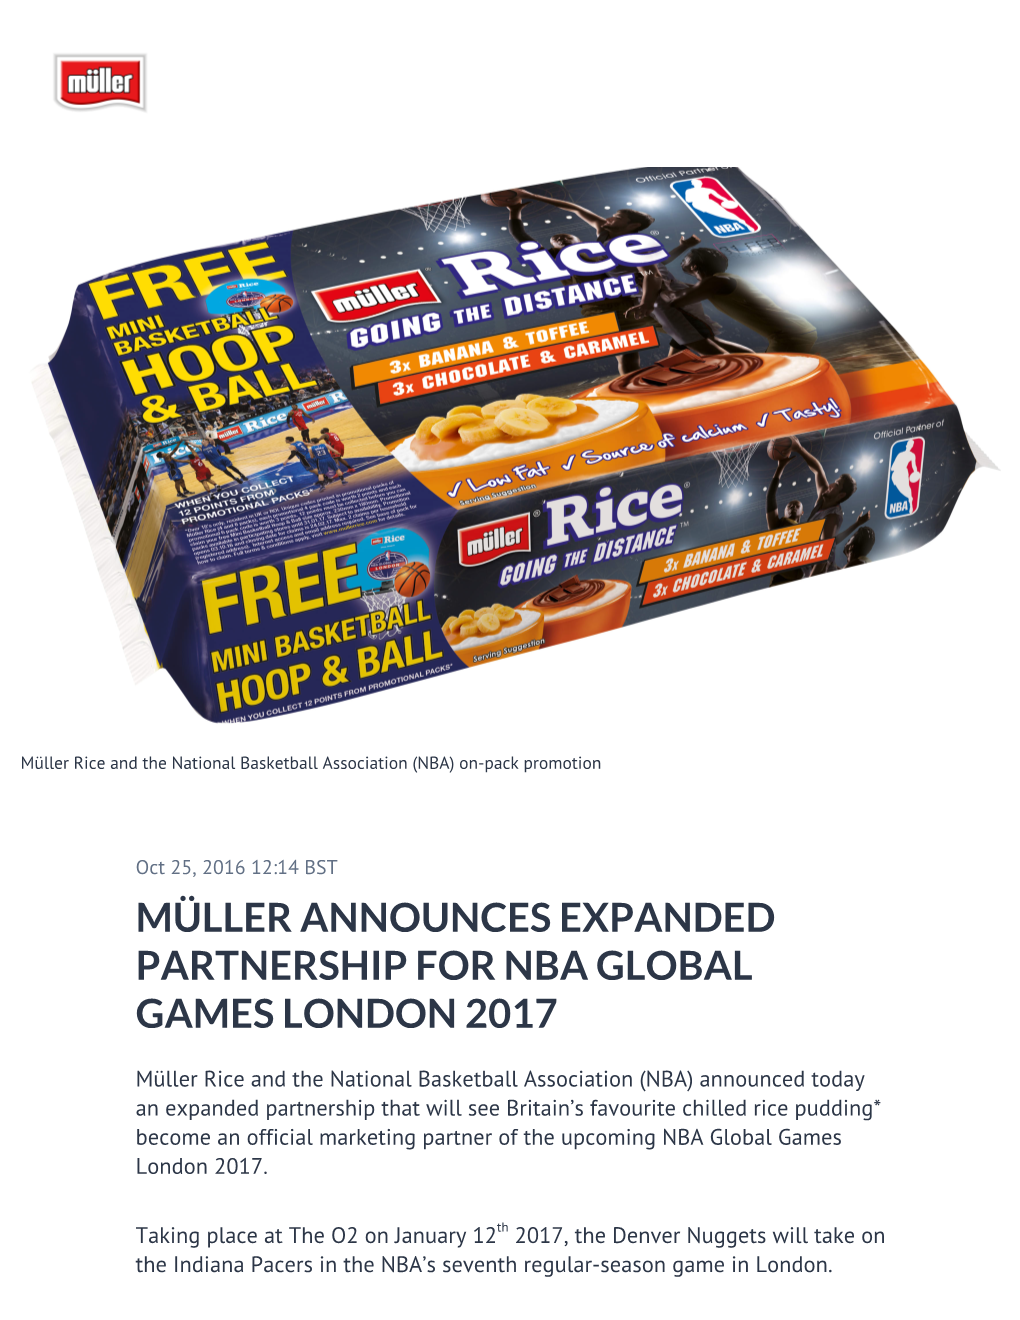 Müller Announces Expanded Partnership for Nba Global Games London 2017